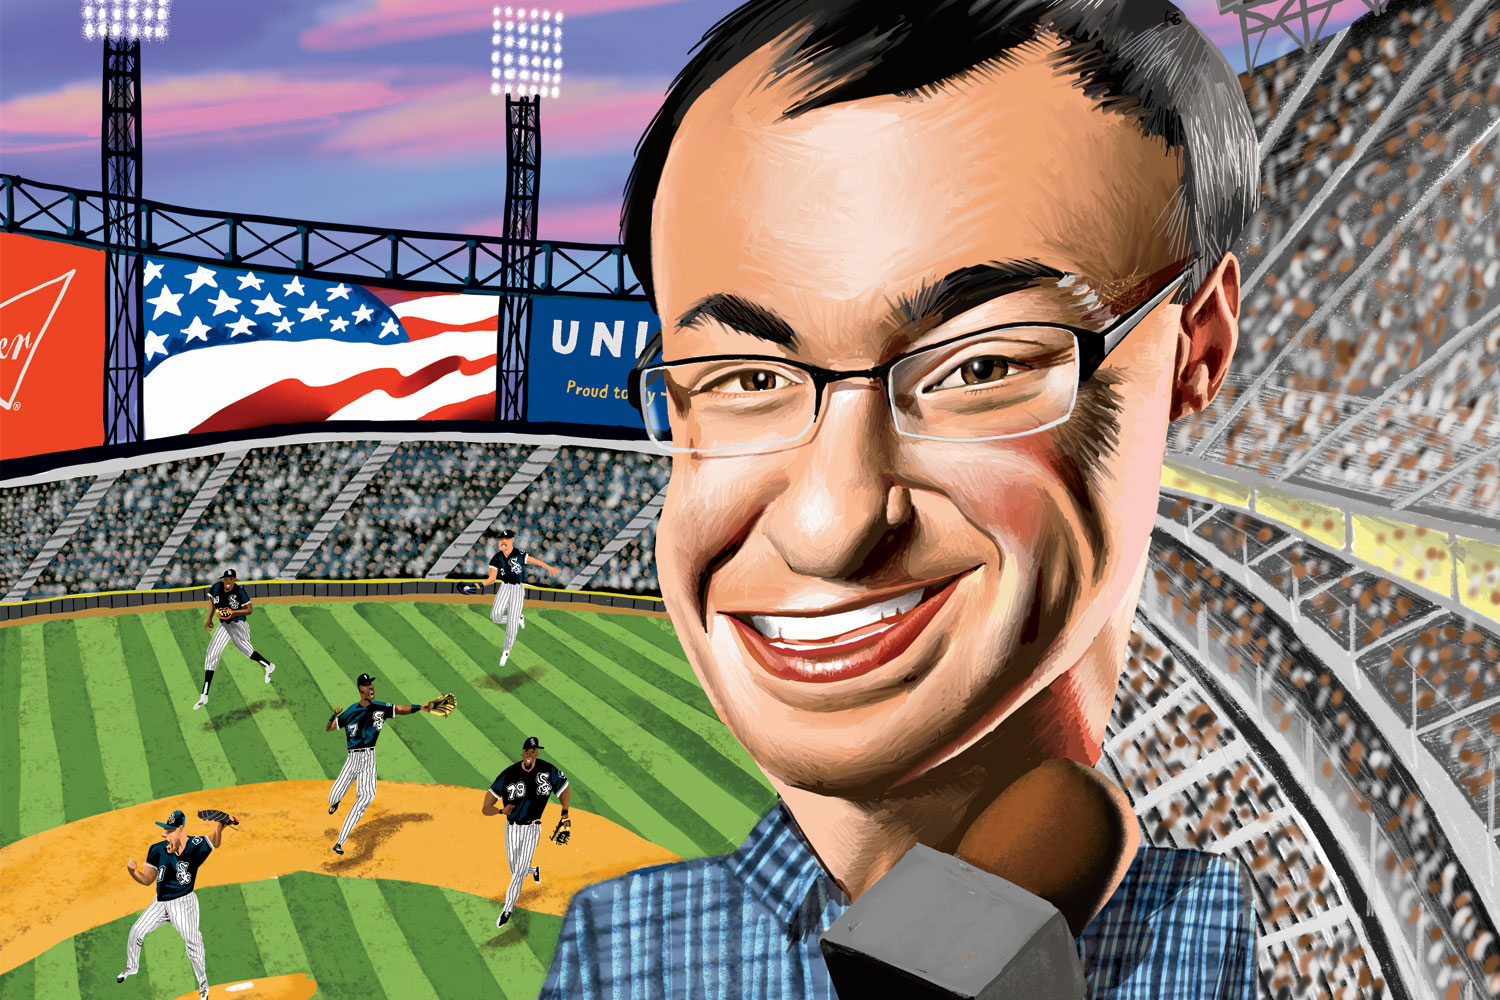 White Sox Jason Benetti inspires broadcaster with cerebral palsy